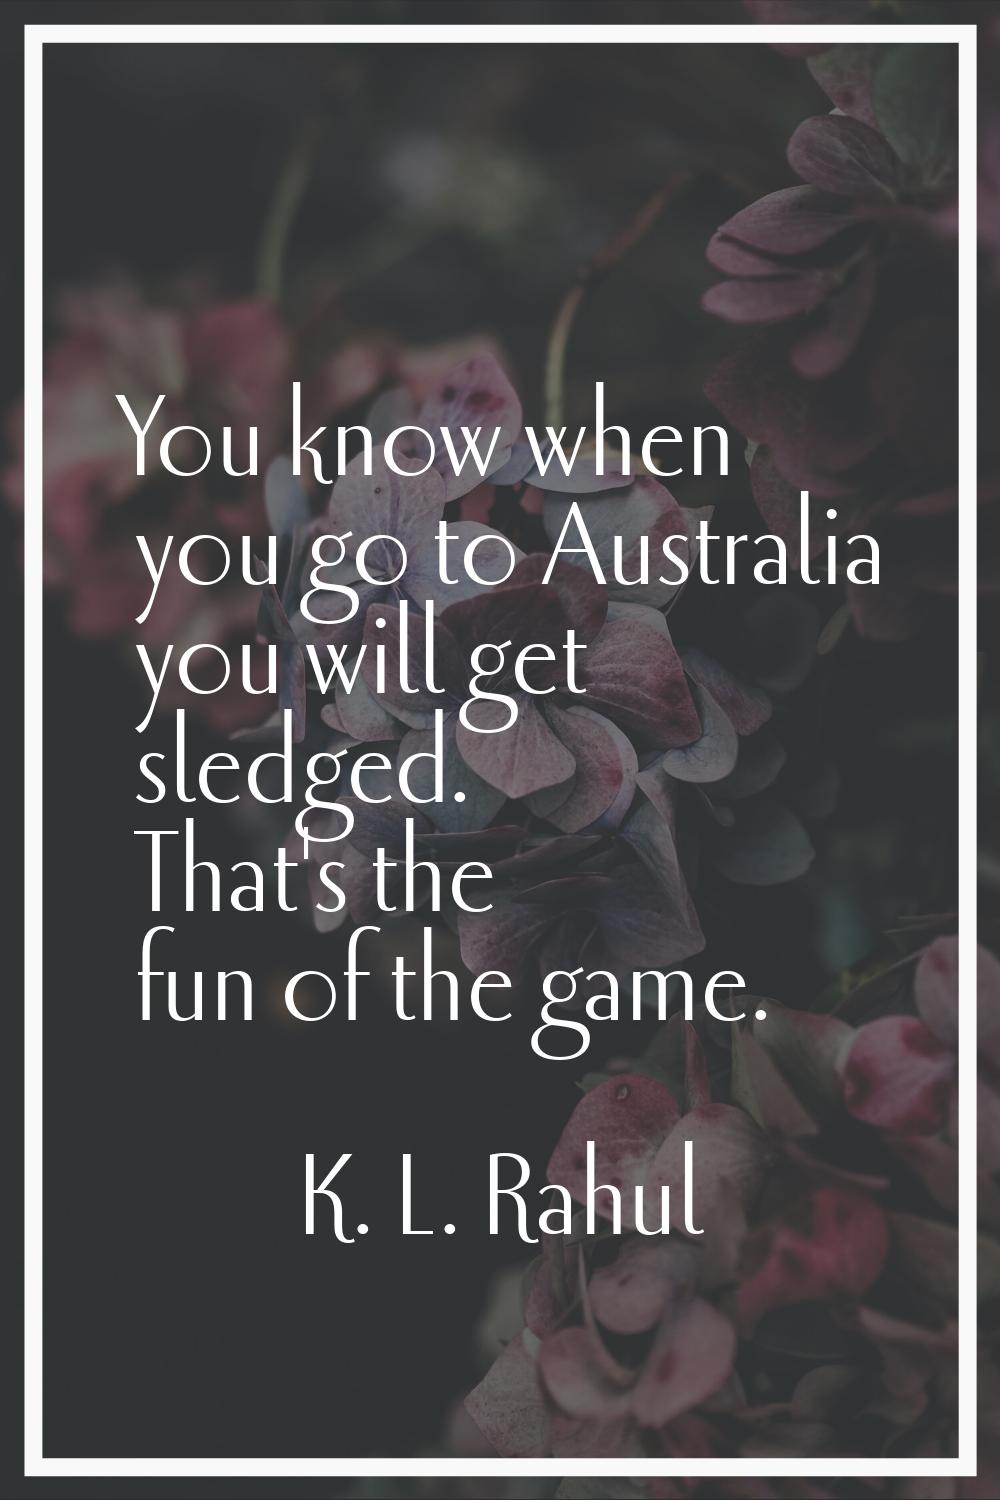 You know when you go to Australia you will get sledged. That's the fun of the game.